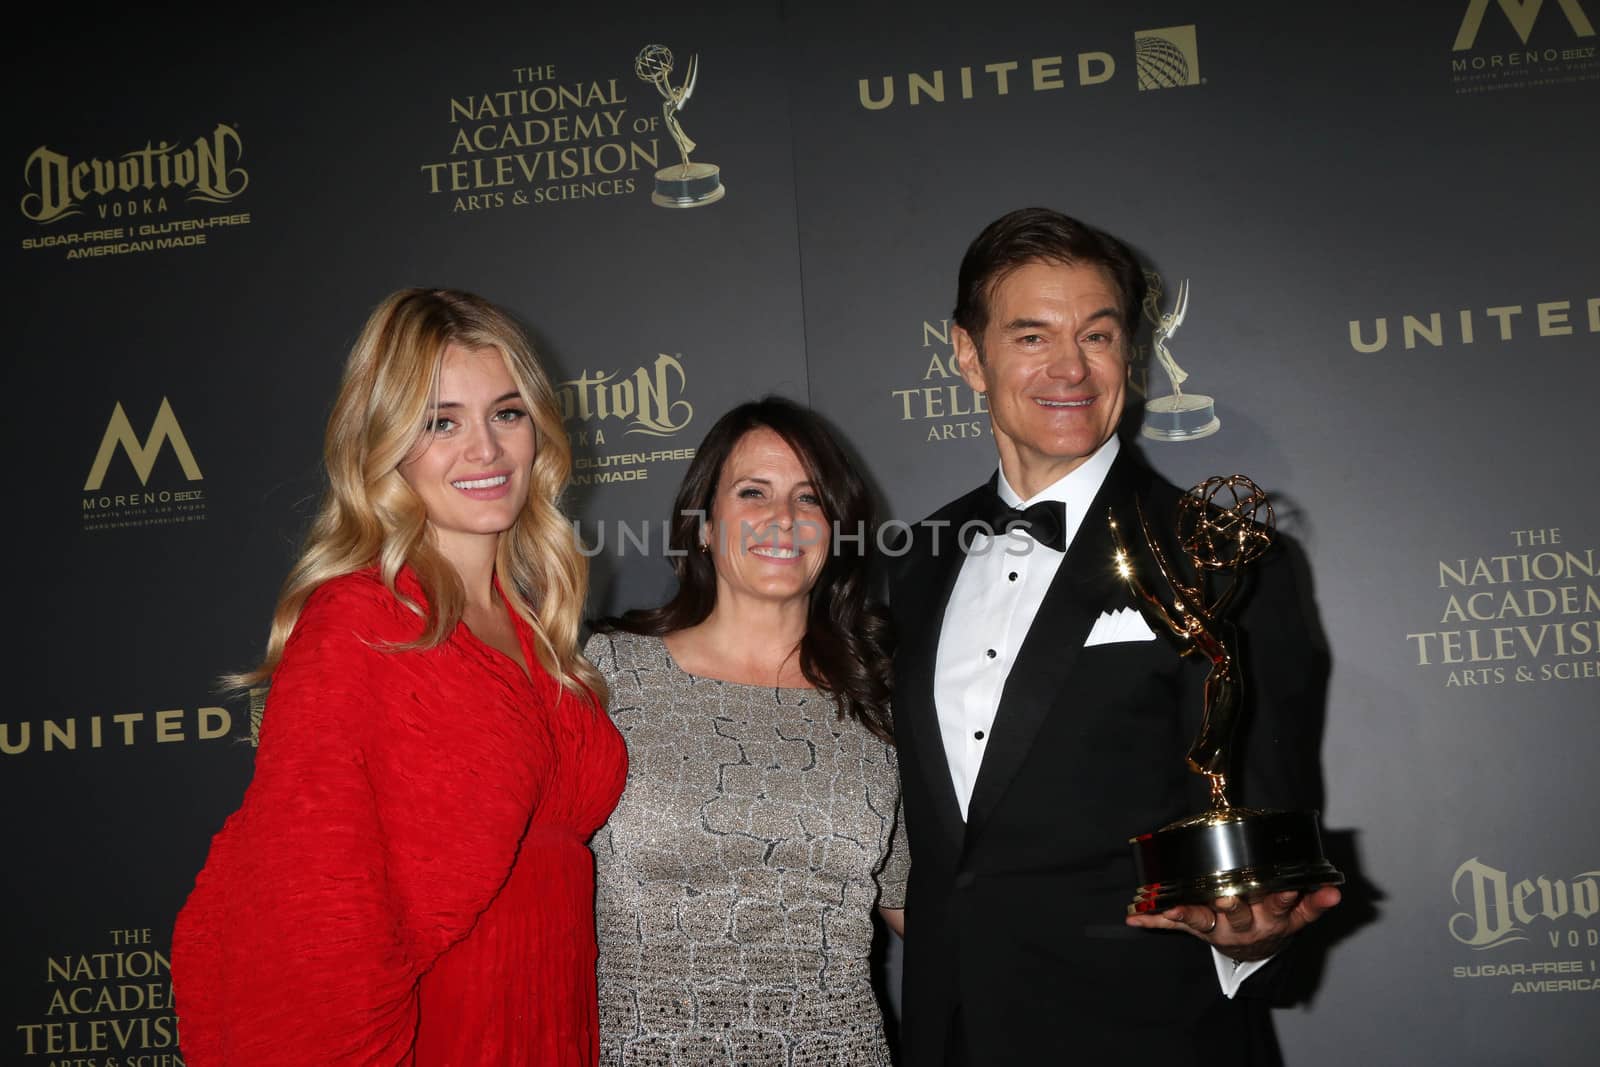 Daphne Oz, Guest, Dr. Mehmet Oz, Outstanding Talk Show - Informative
at the 44th Daytime Emmy Awards - Press Room, Pasadena Civic Auditorium, Pasadena, CA 04-30-17/ImageCollect by ImageCollect